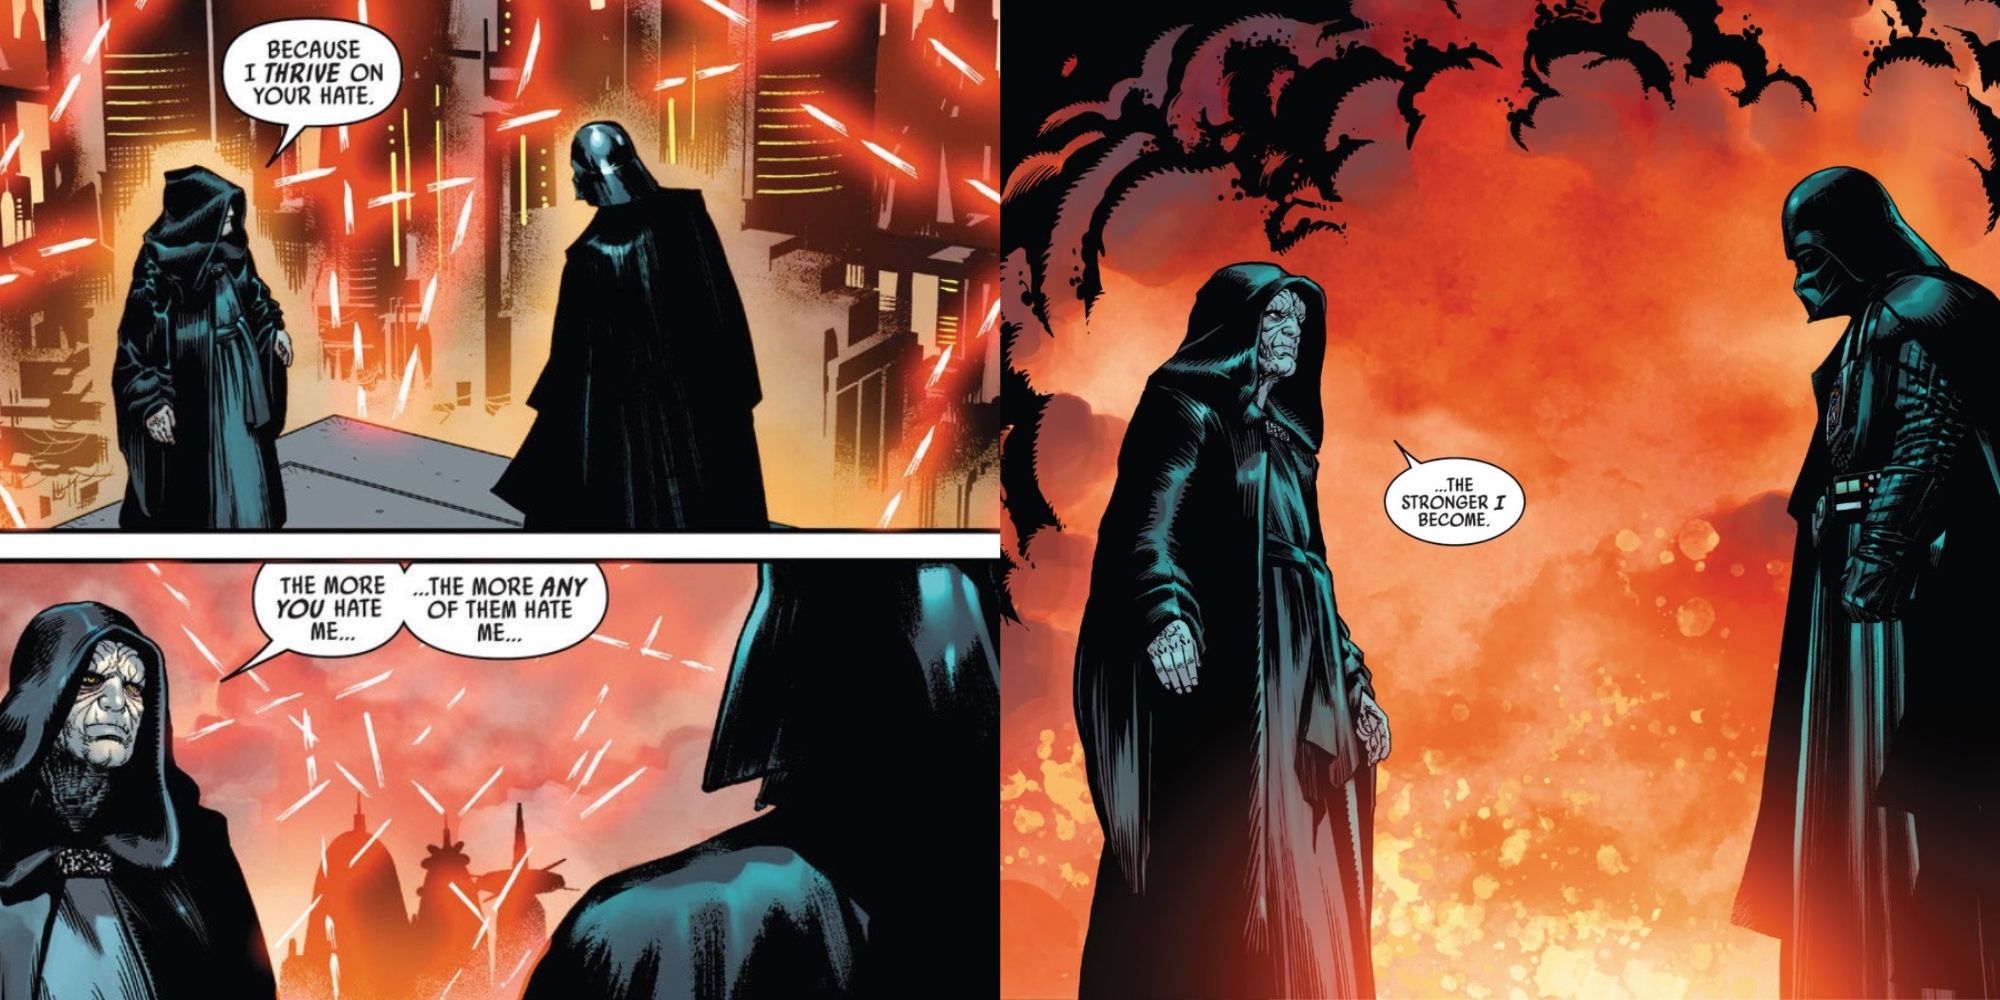 “I Thrive on Your Hate”: Palpatine Confirms Once and For All Why Darth Vader Could Never Beat Him